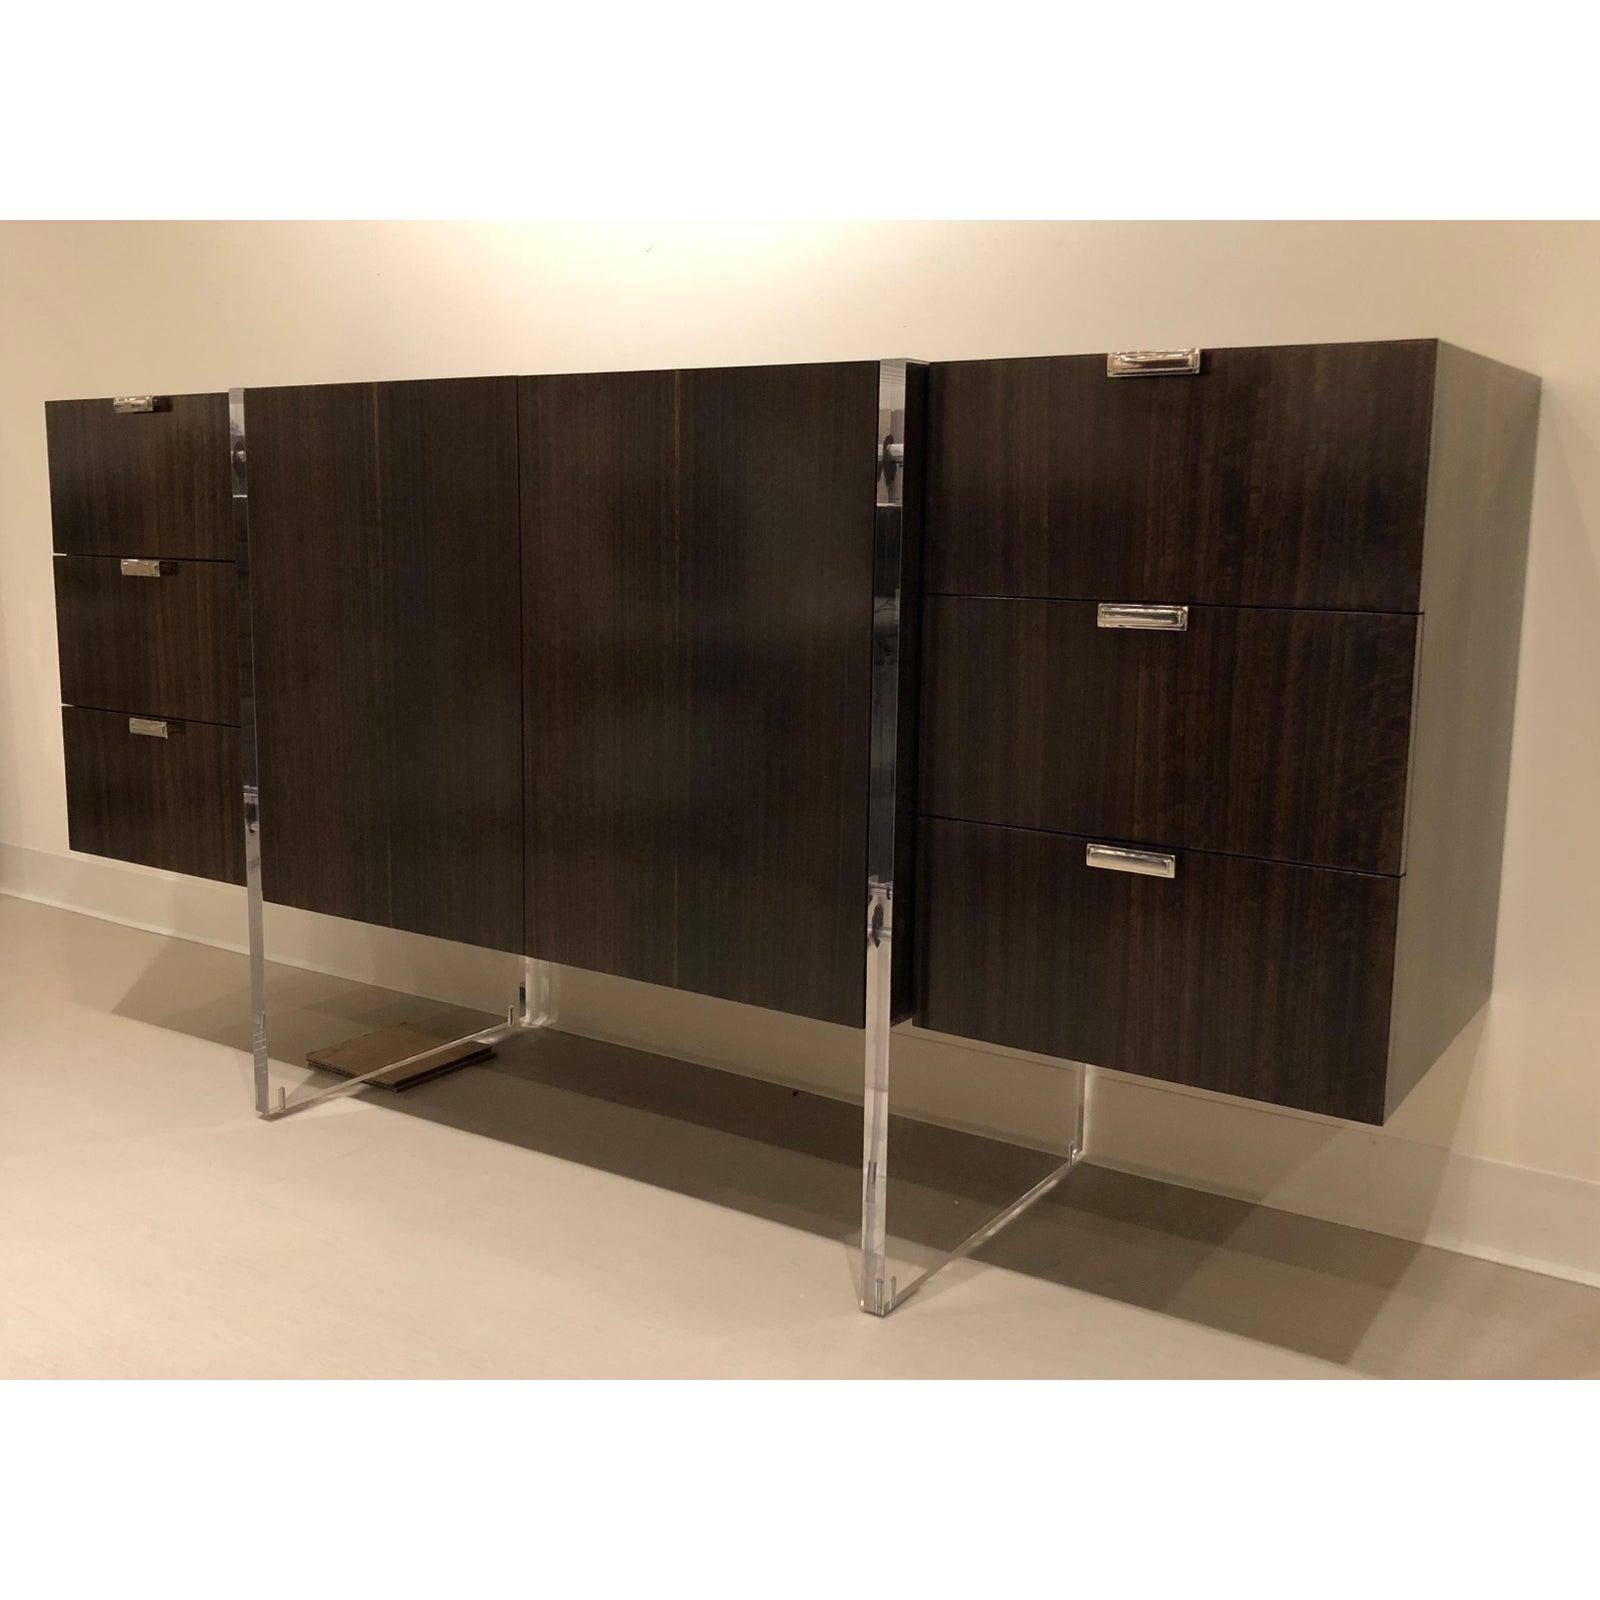 Showroom New. This modern cabinet or sideboard has fumed figured Eucalyptus Veneer, Acrylic slab supports and six soft closing drawers with stainless steel handles. The center portion cabinet has one adjustable shelf.